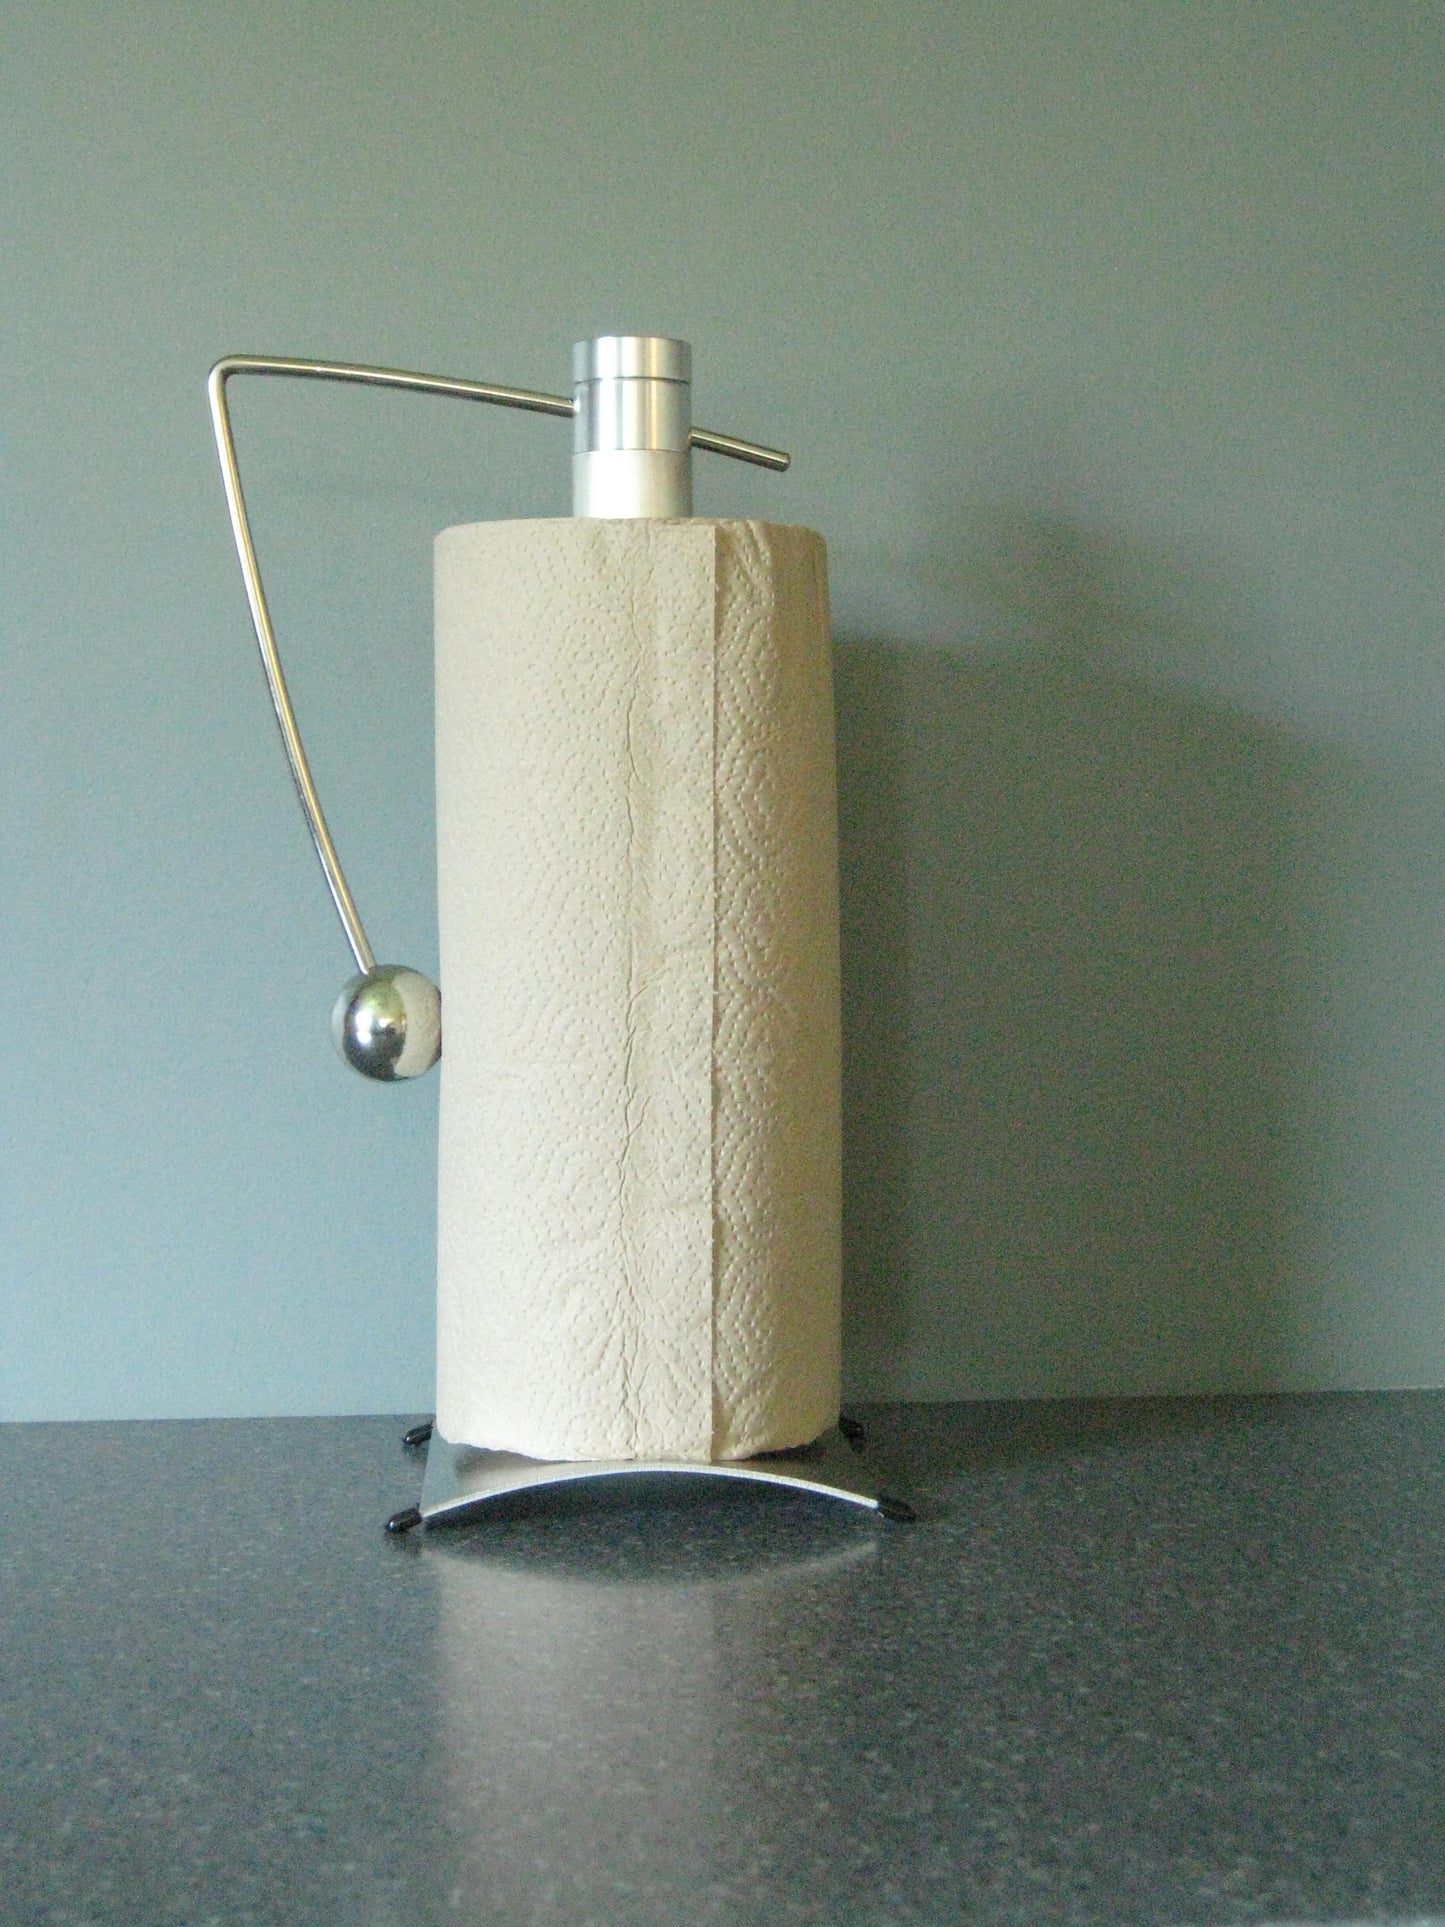 Zojila.com : Isis Paper towel roll holder, Modern Stand Stainless Steel, Nickel Finish, 6 x 7.25 x 14.25 inch : Home Accessories